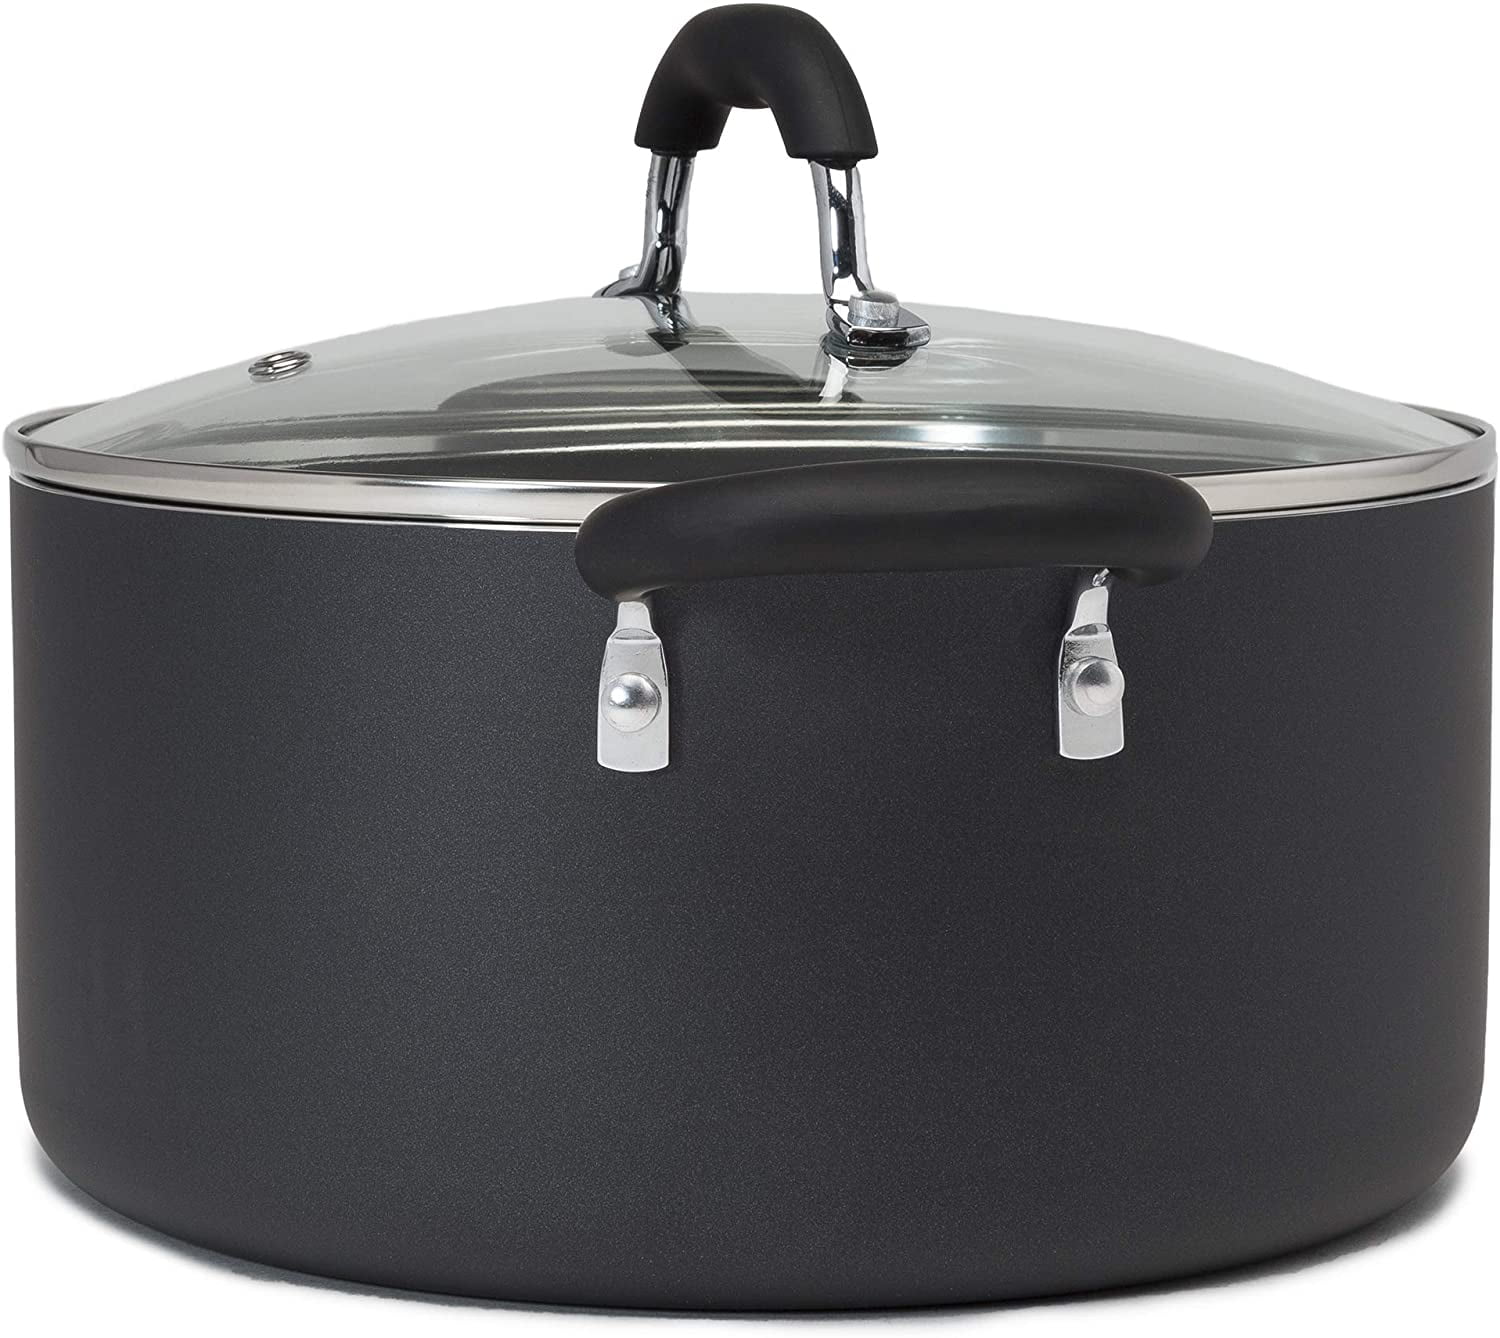 PHANTOM CHEF 6.4 QT Dutch Oven Pot with Lid | Non-Stick Ceramic Coating |  with Dual Handles & Handle Covers | PTFE & PFOA Free | Induction Compatible